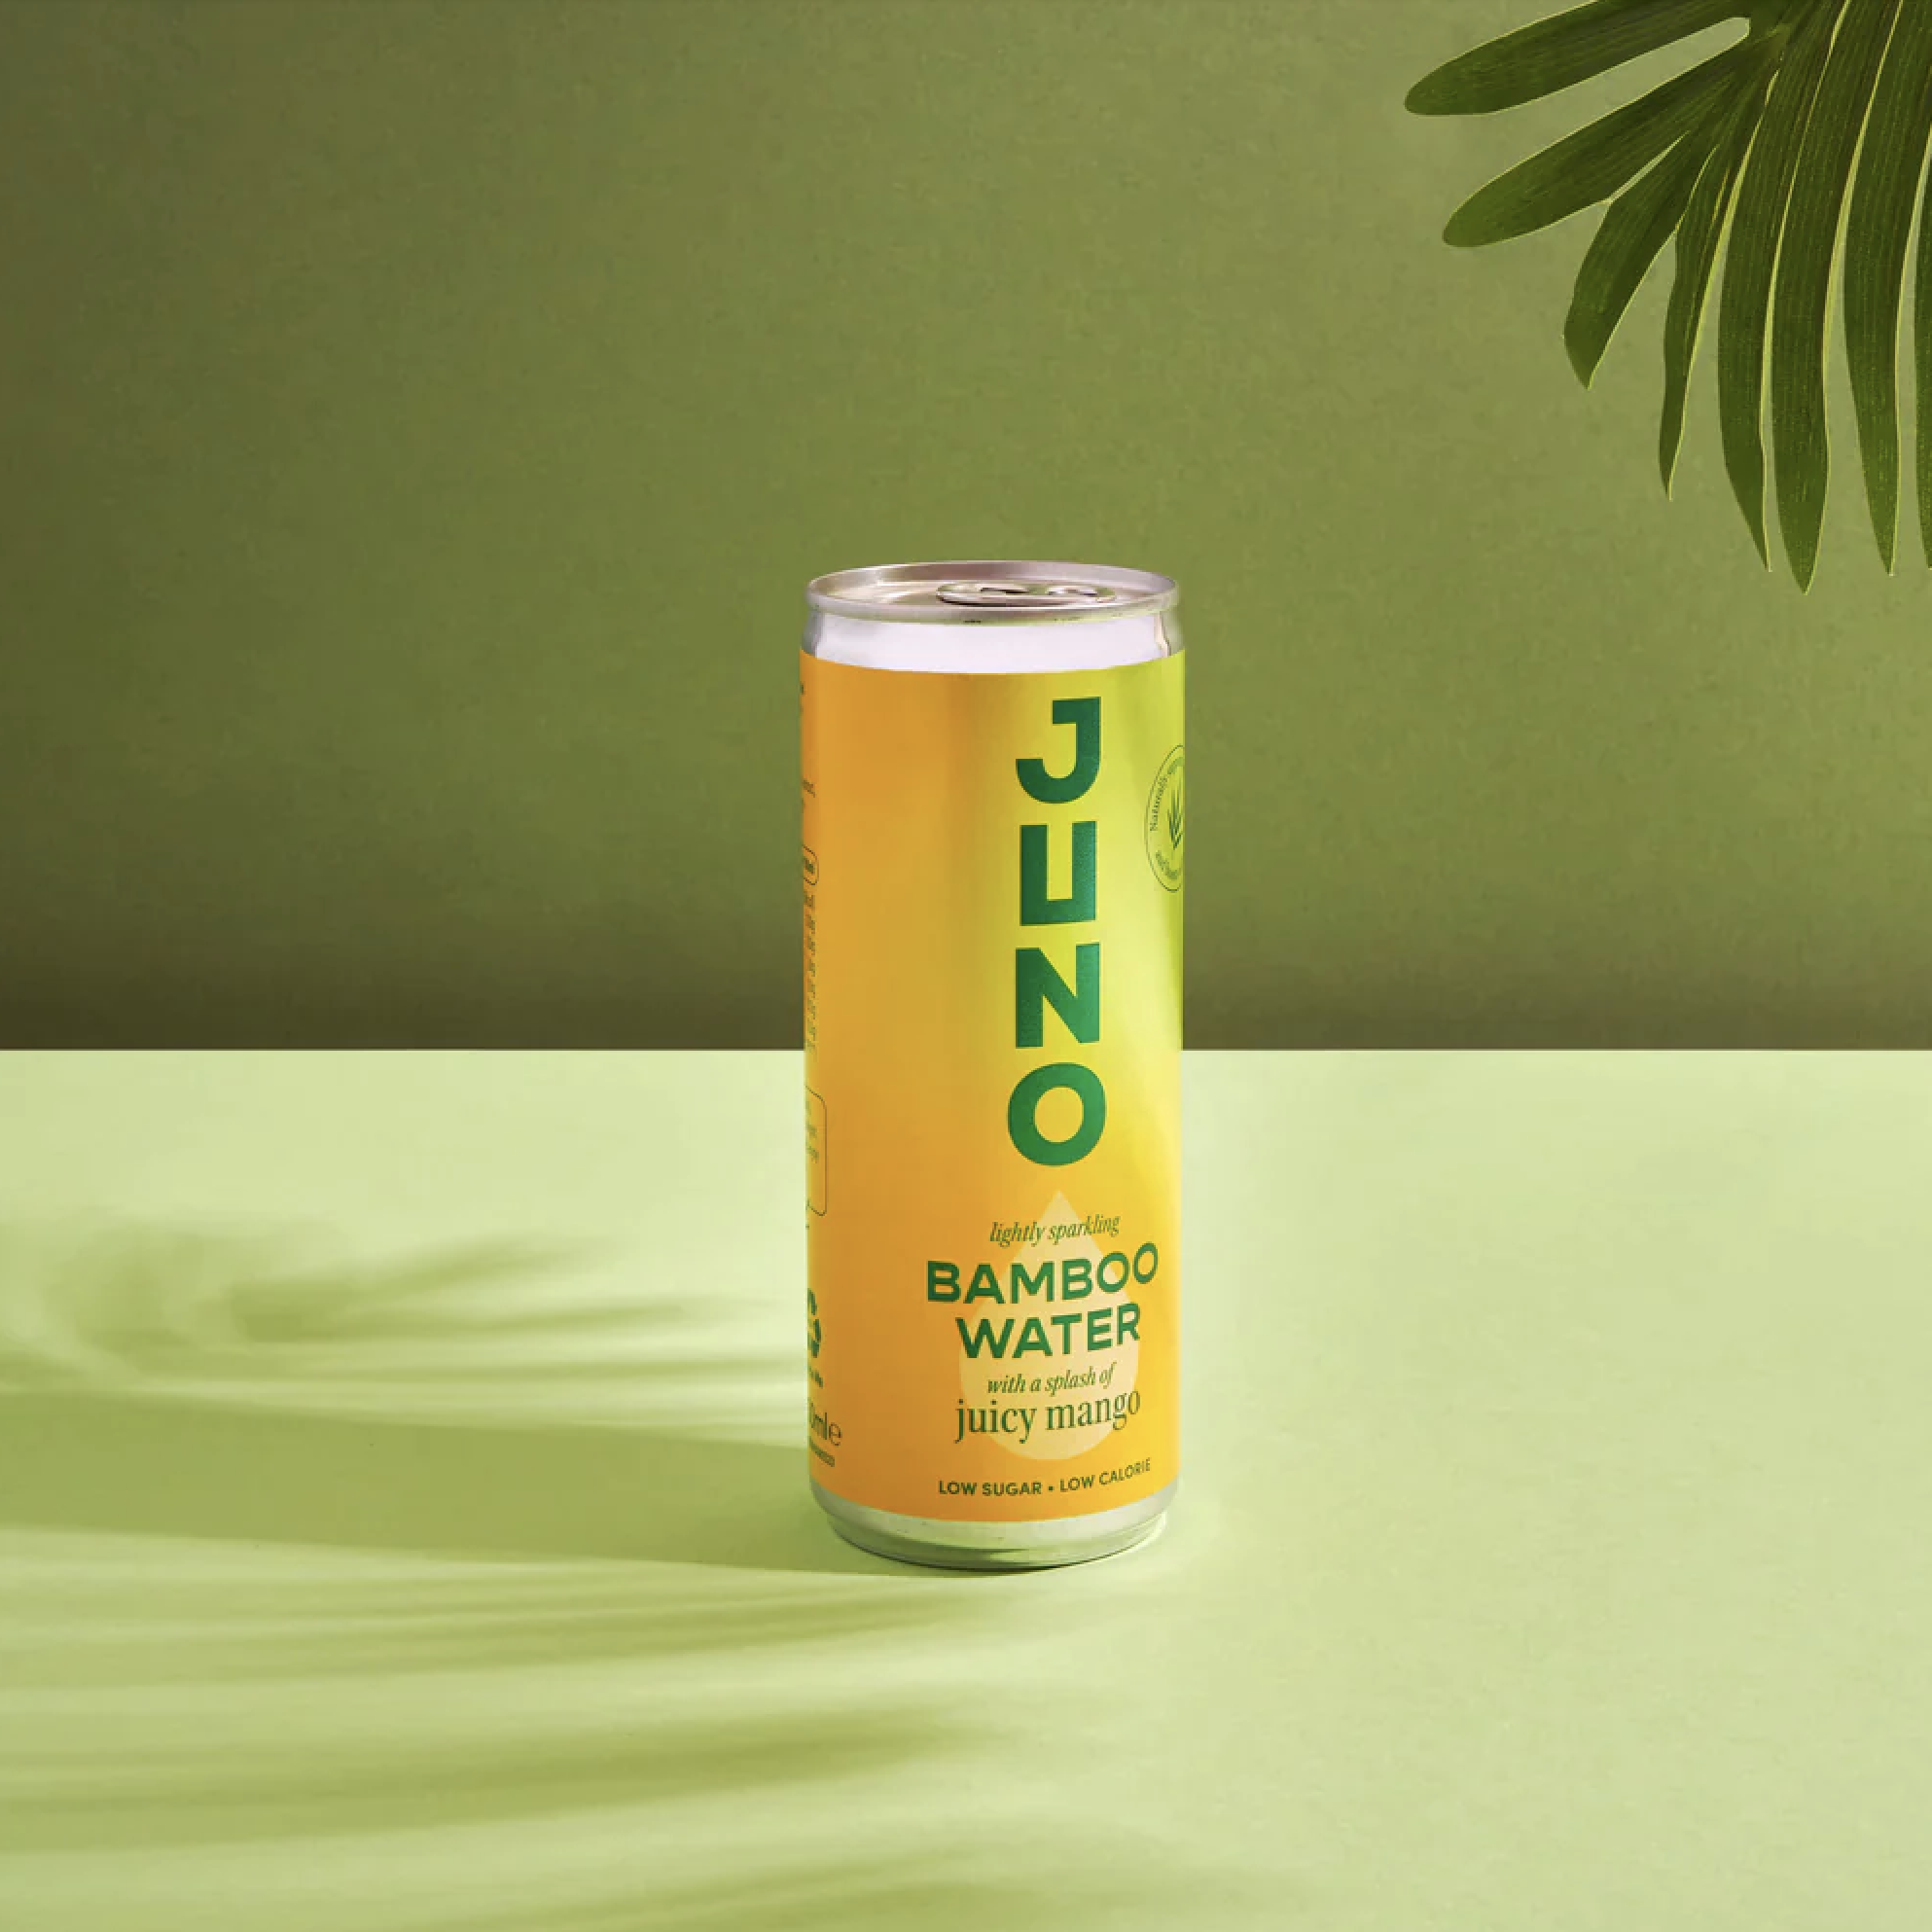 A yellow can of Juno bamboo water